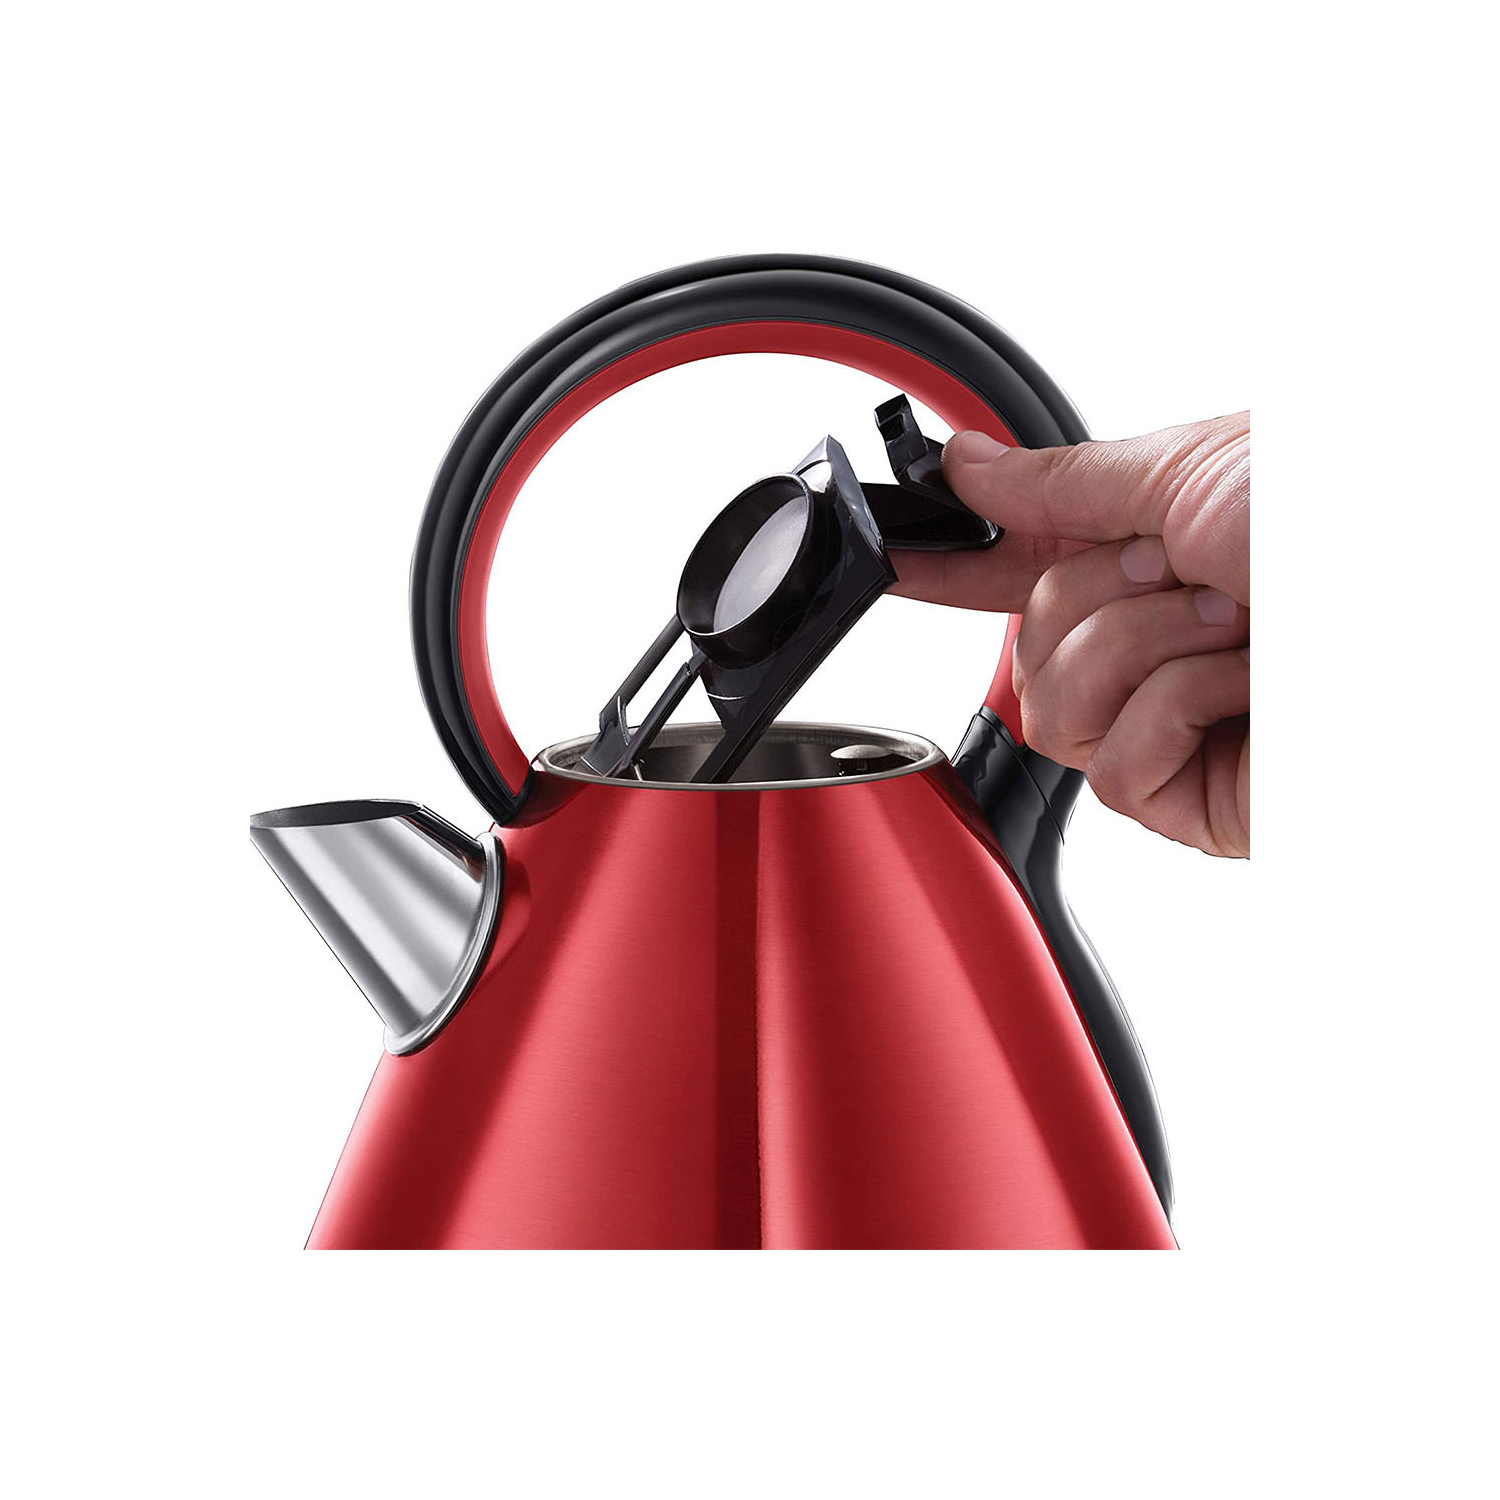 Legacy Kettle - Red